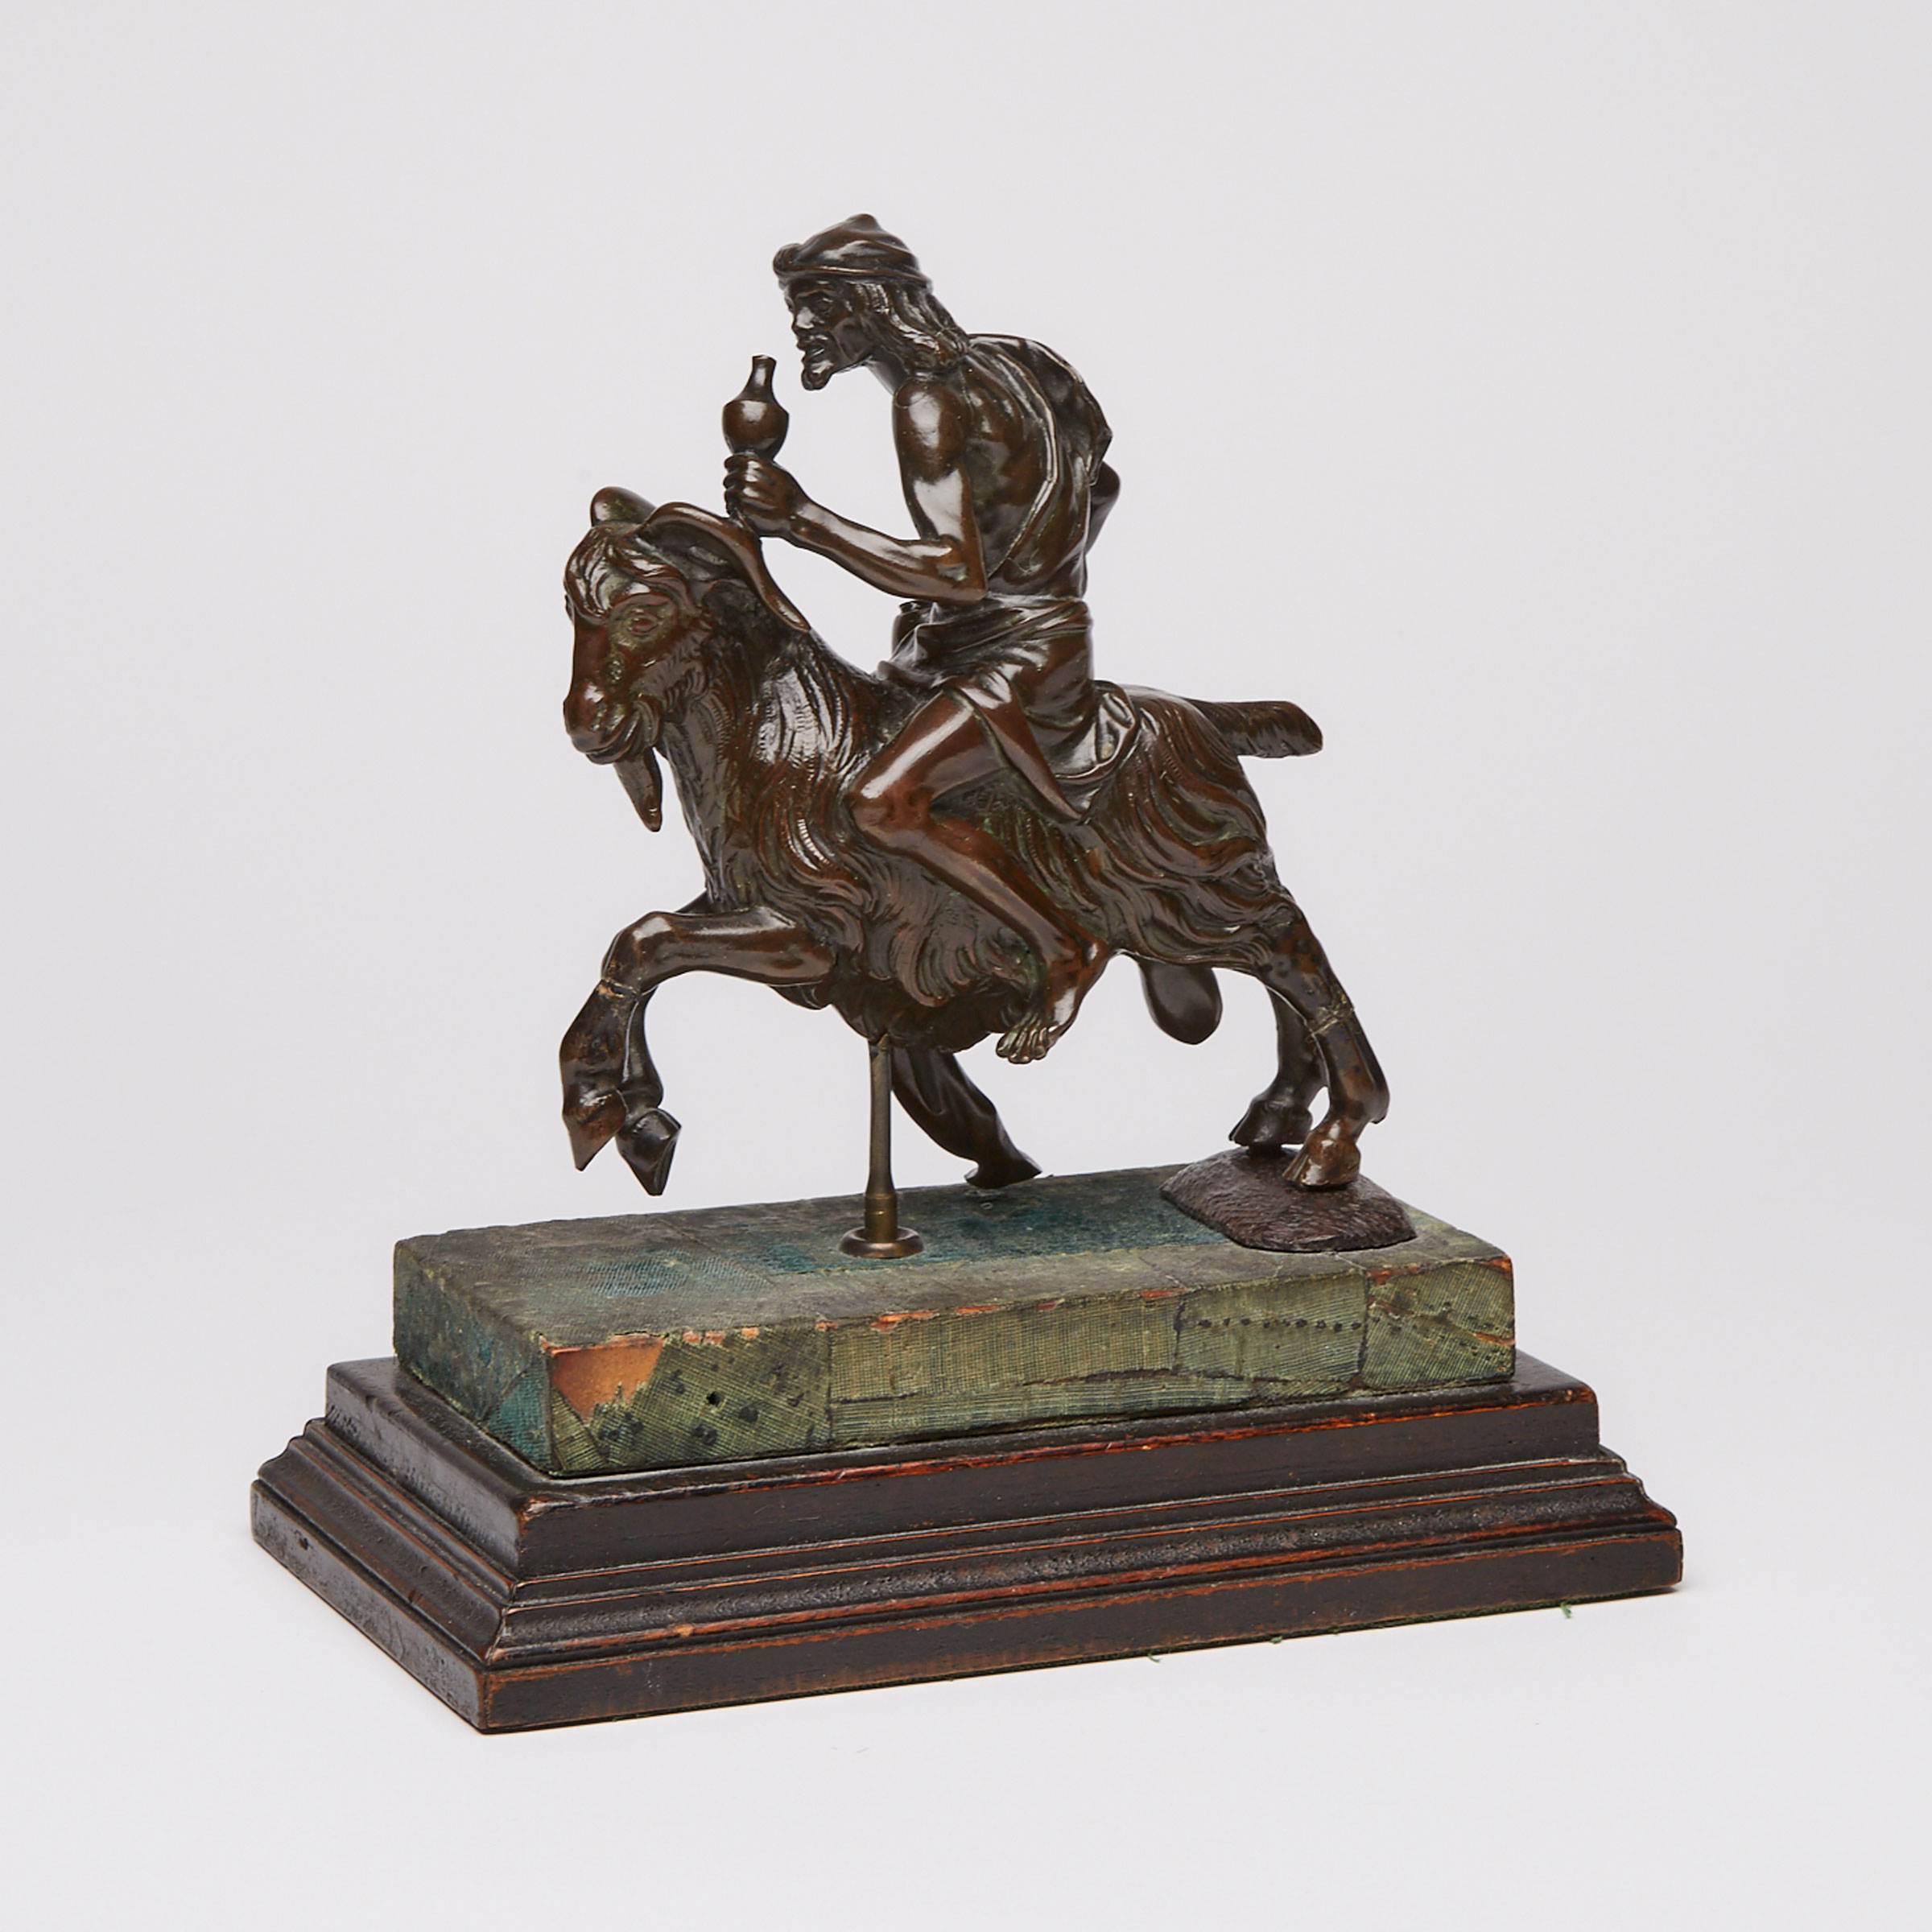 North Italian Bronze Group of an Old Man Riding a Goat, Attributed to the Workshop of Ferdinando Tacca, Florence, second quarter of the 17th century